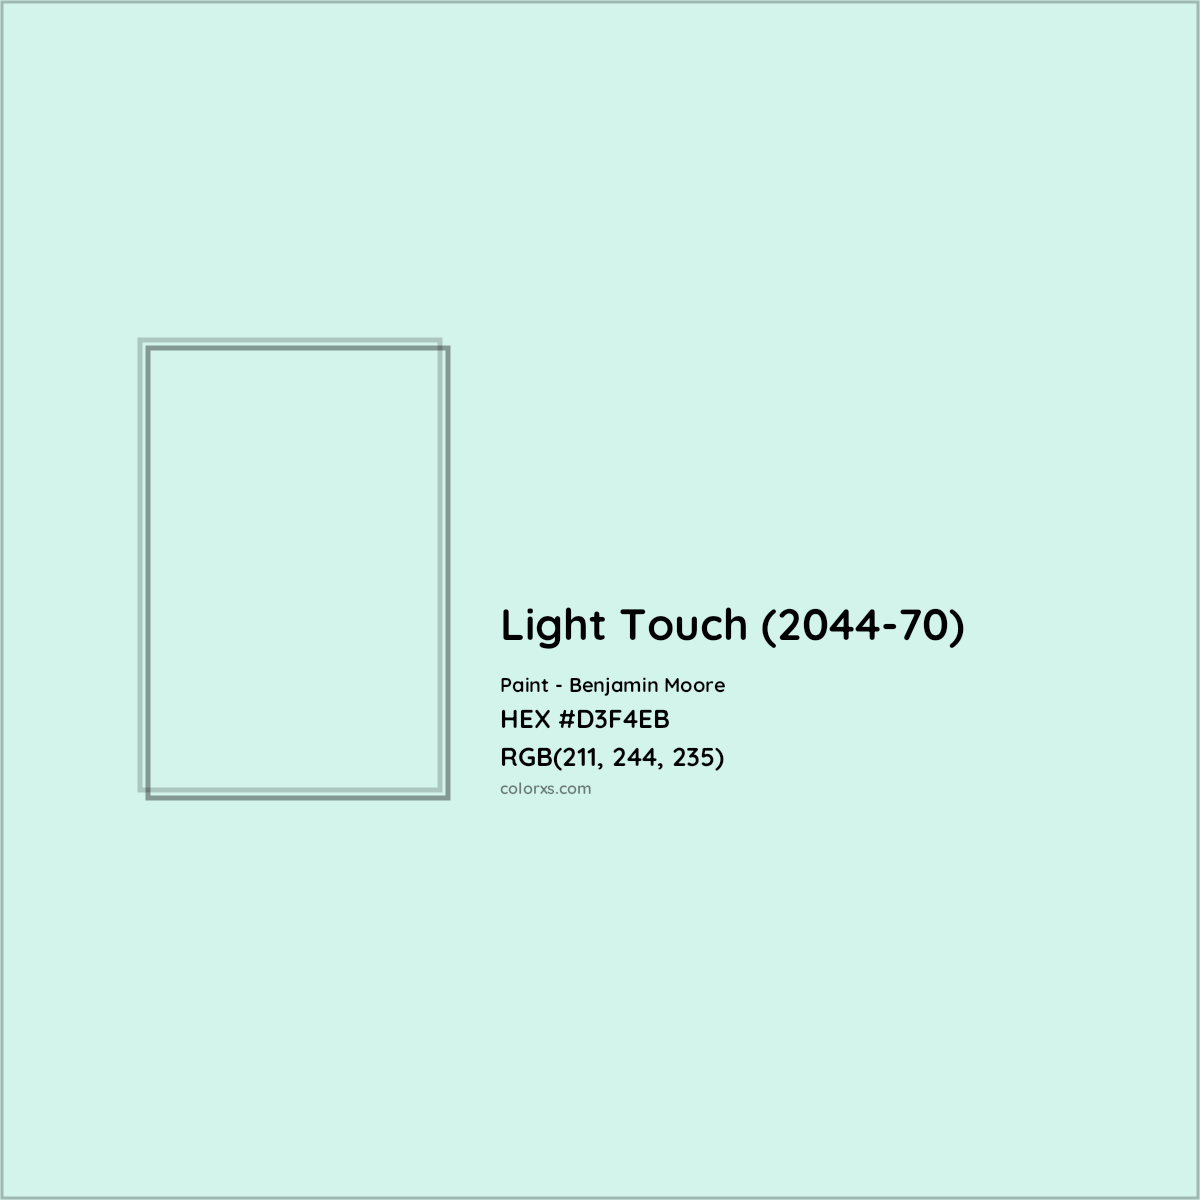 HEX #D3F4EB Light Touch (2044-70) Paint Benjamin Moore - Color Code